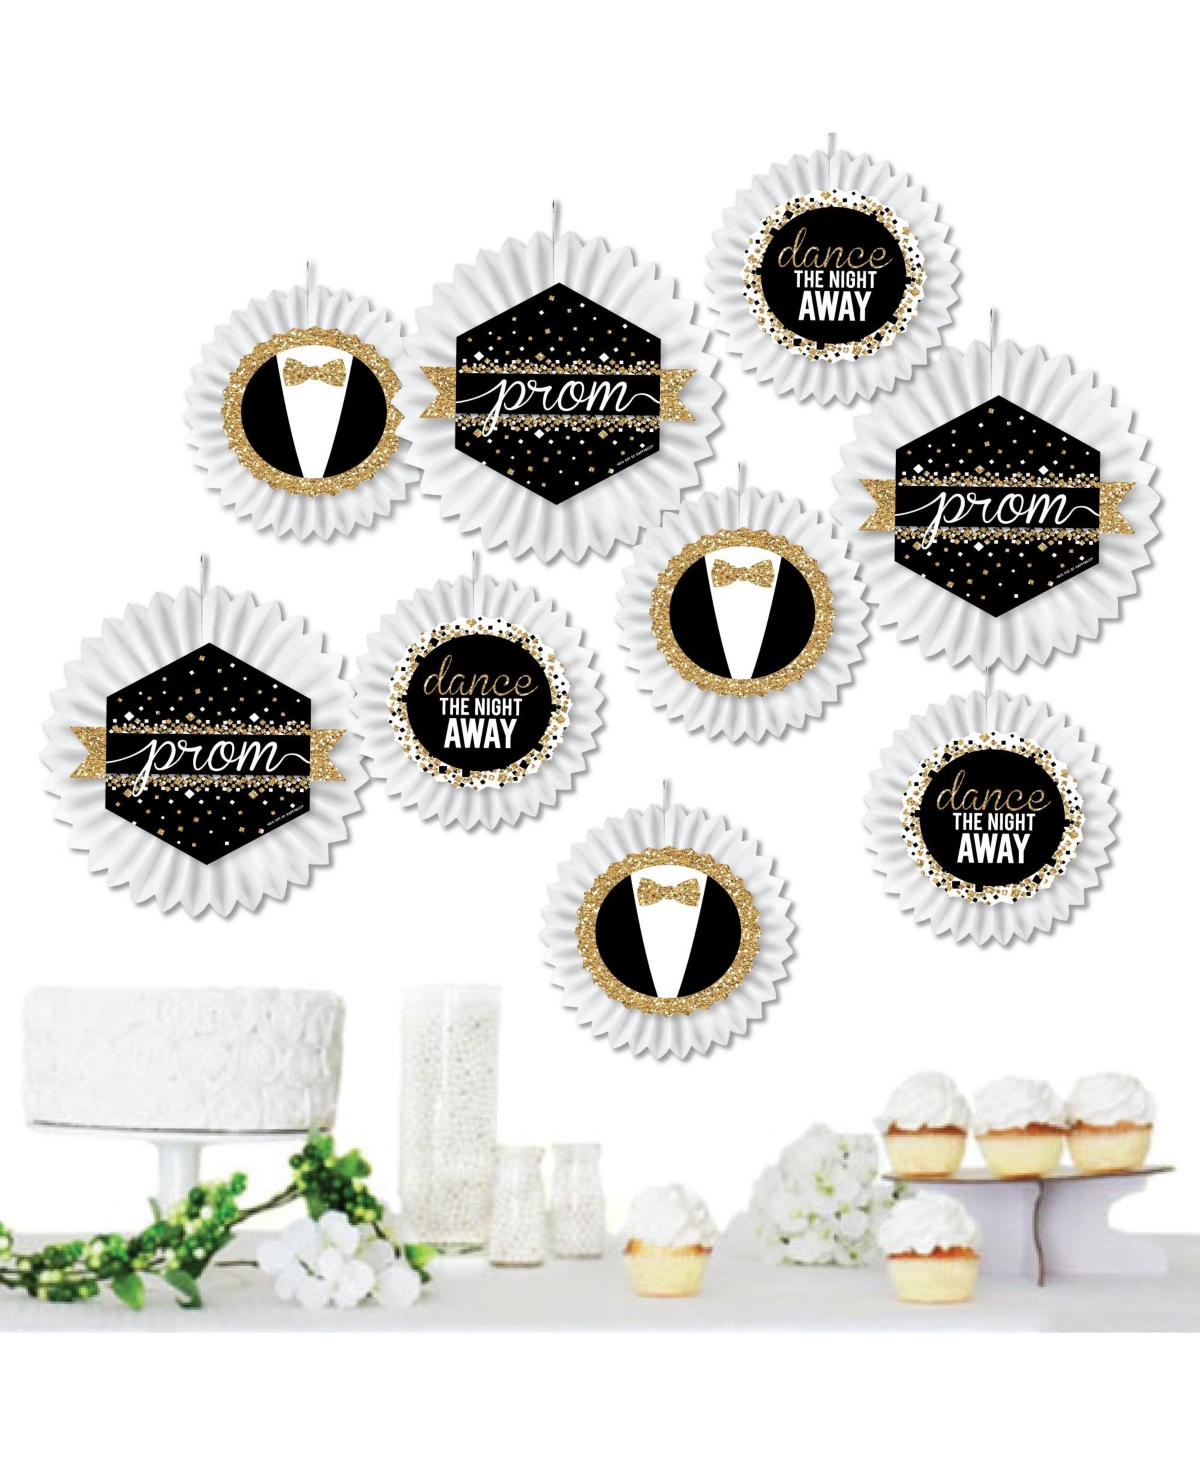 Prom - Hanging Prom Night Party Tissue Decoration Kit - Paper Fans - Set of 9